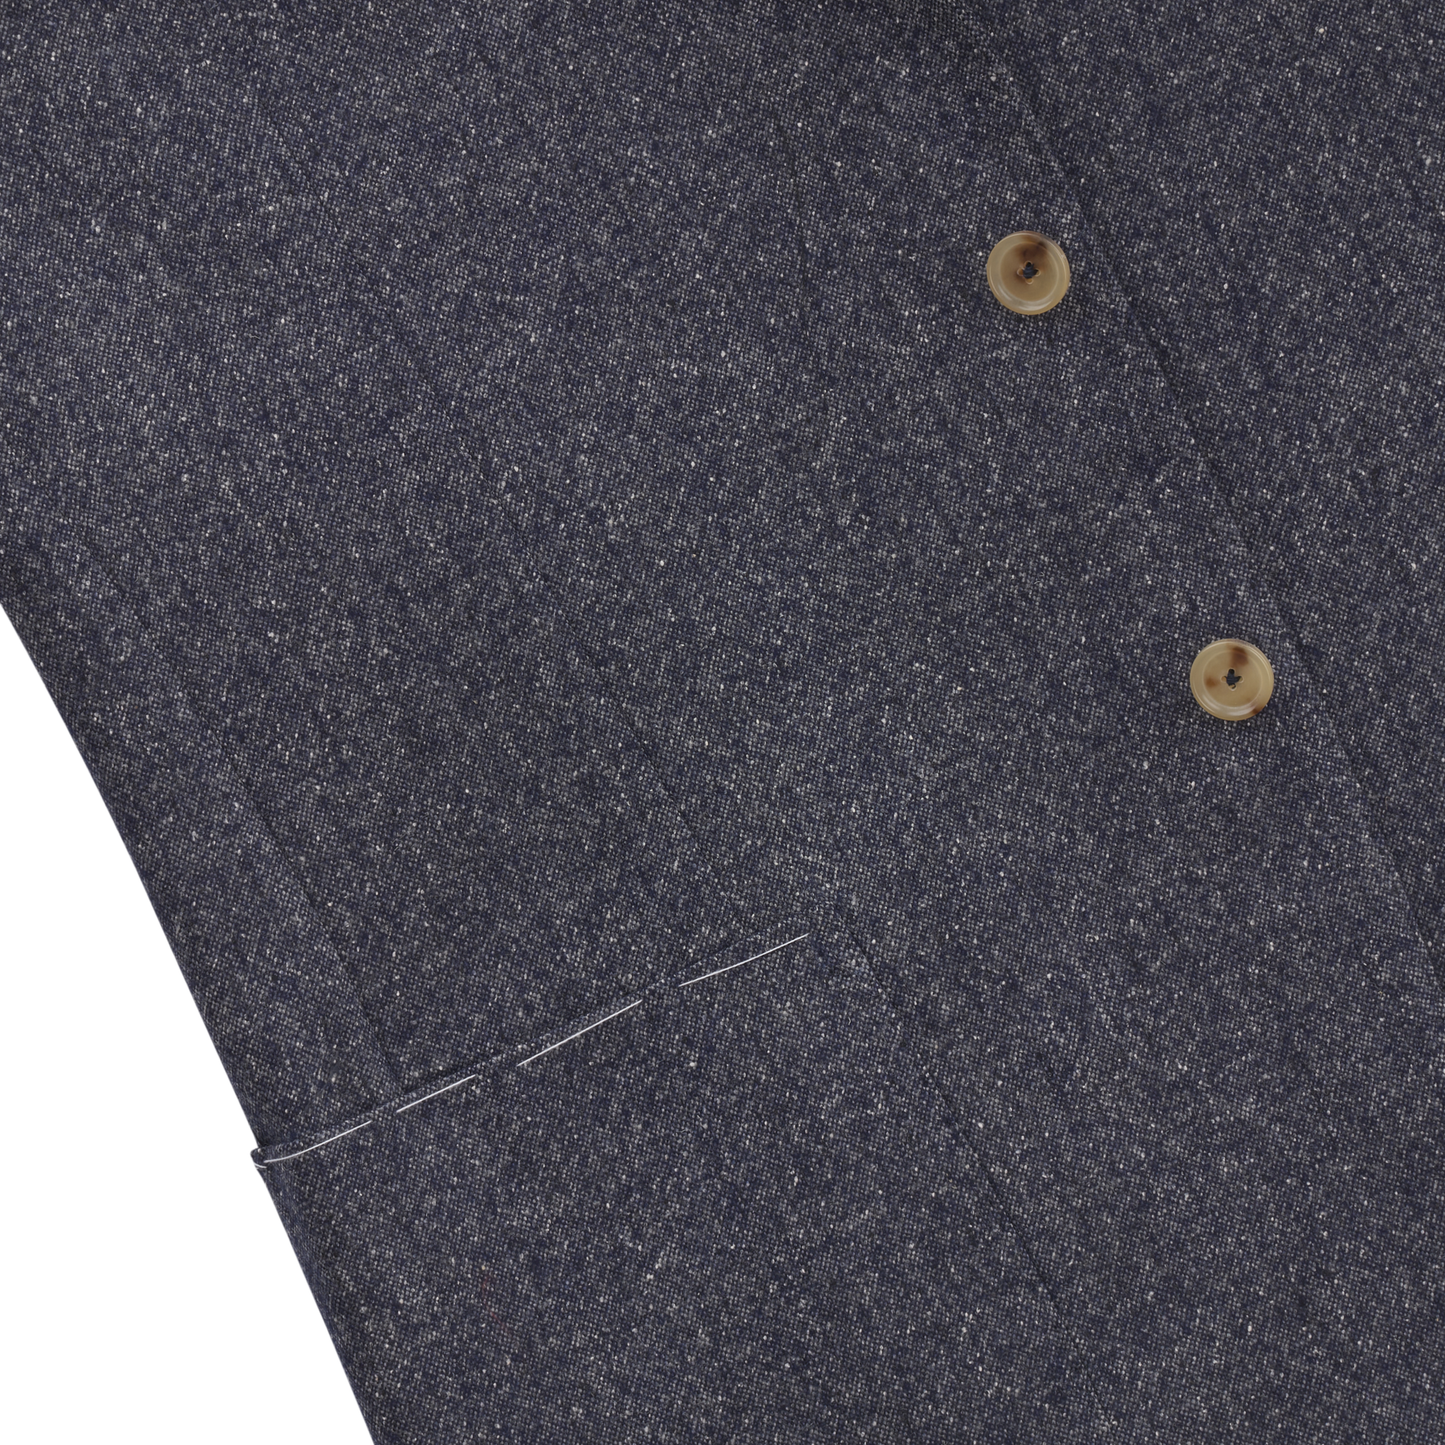 De Petrillo Single-Breasted Wool Jacket in Dark Blue. Exclusively Made for Sartale - SARTALE